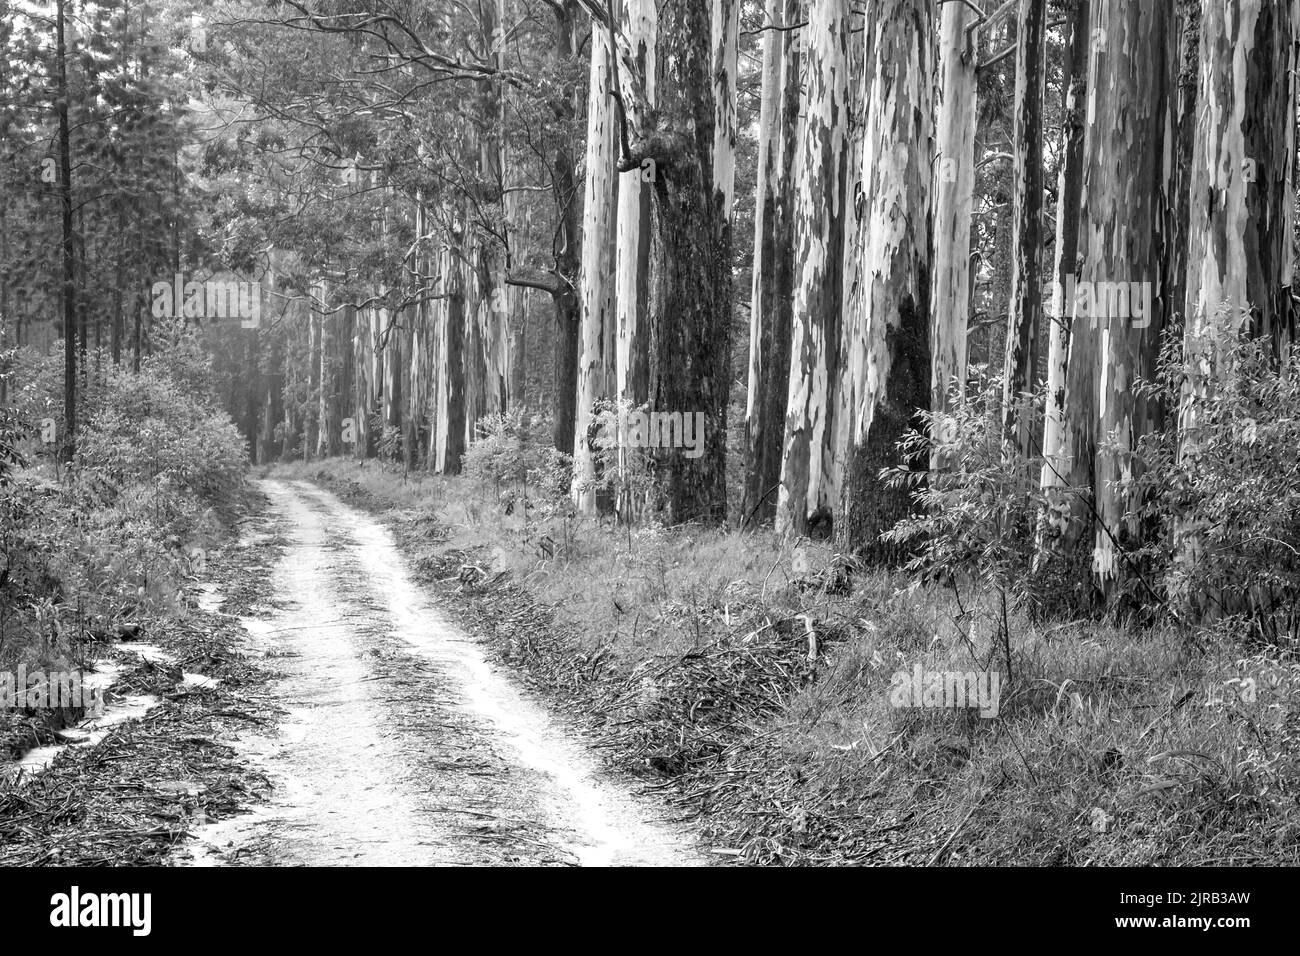 A dirt track next to a groove of large Eucalyptus trees, Eucalyptus Saligna, in Magoebaskloof, South Africa, in black and white Stock Photo